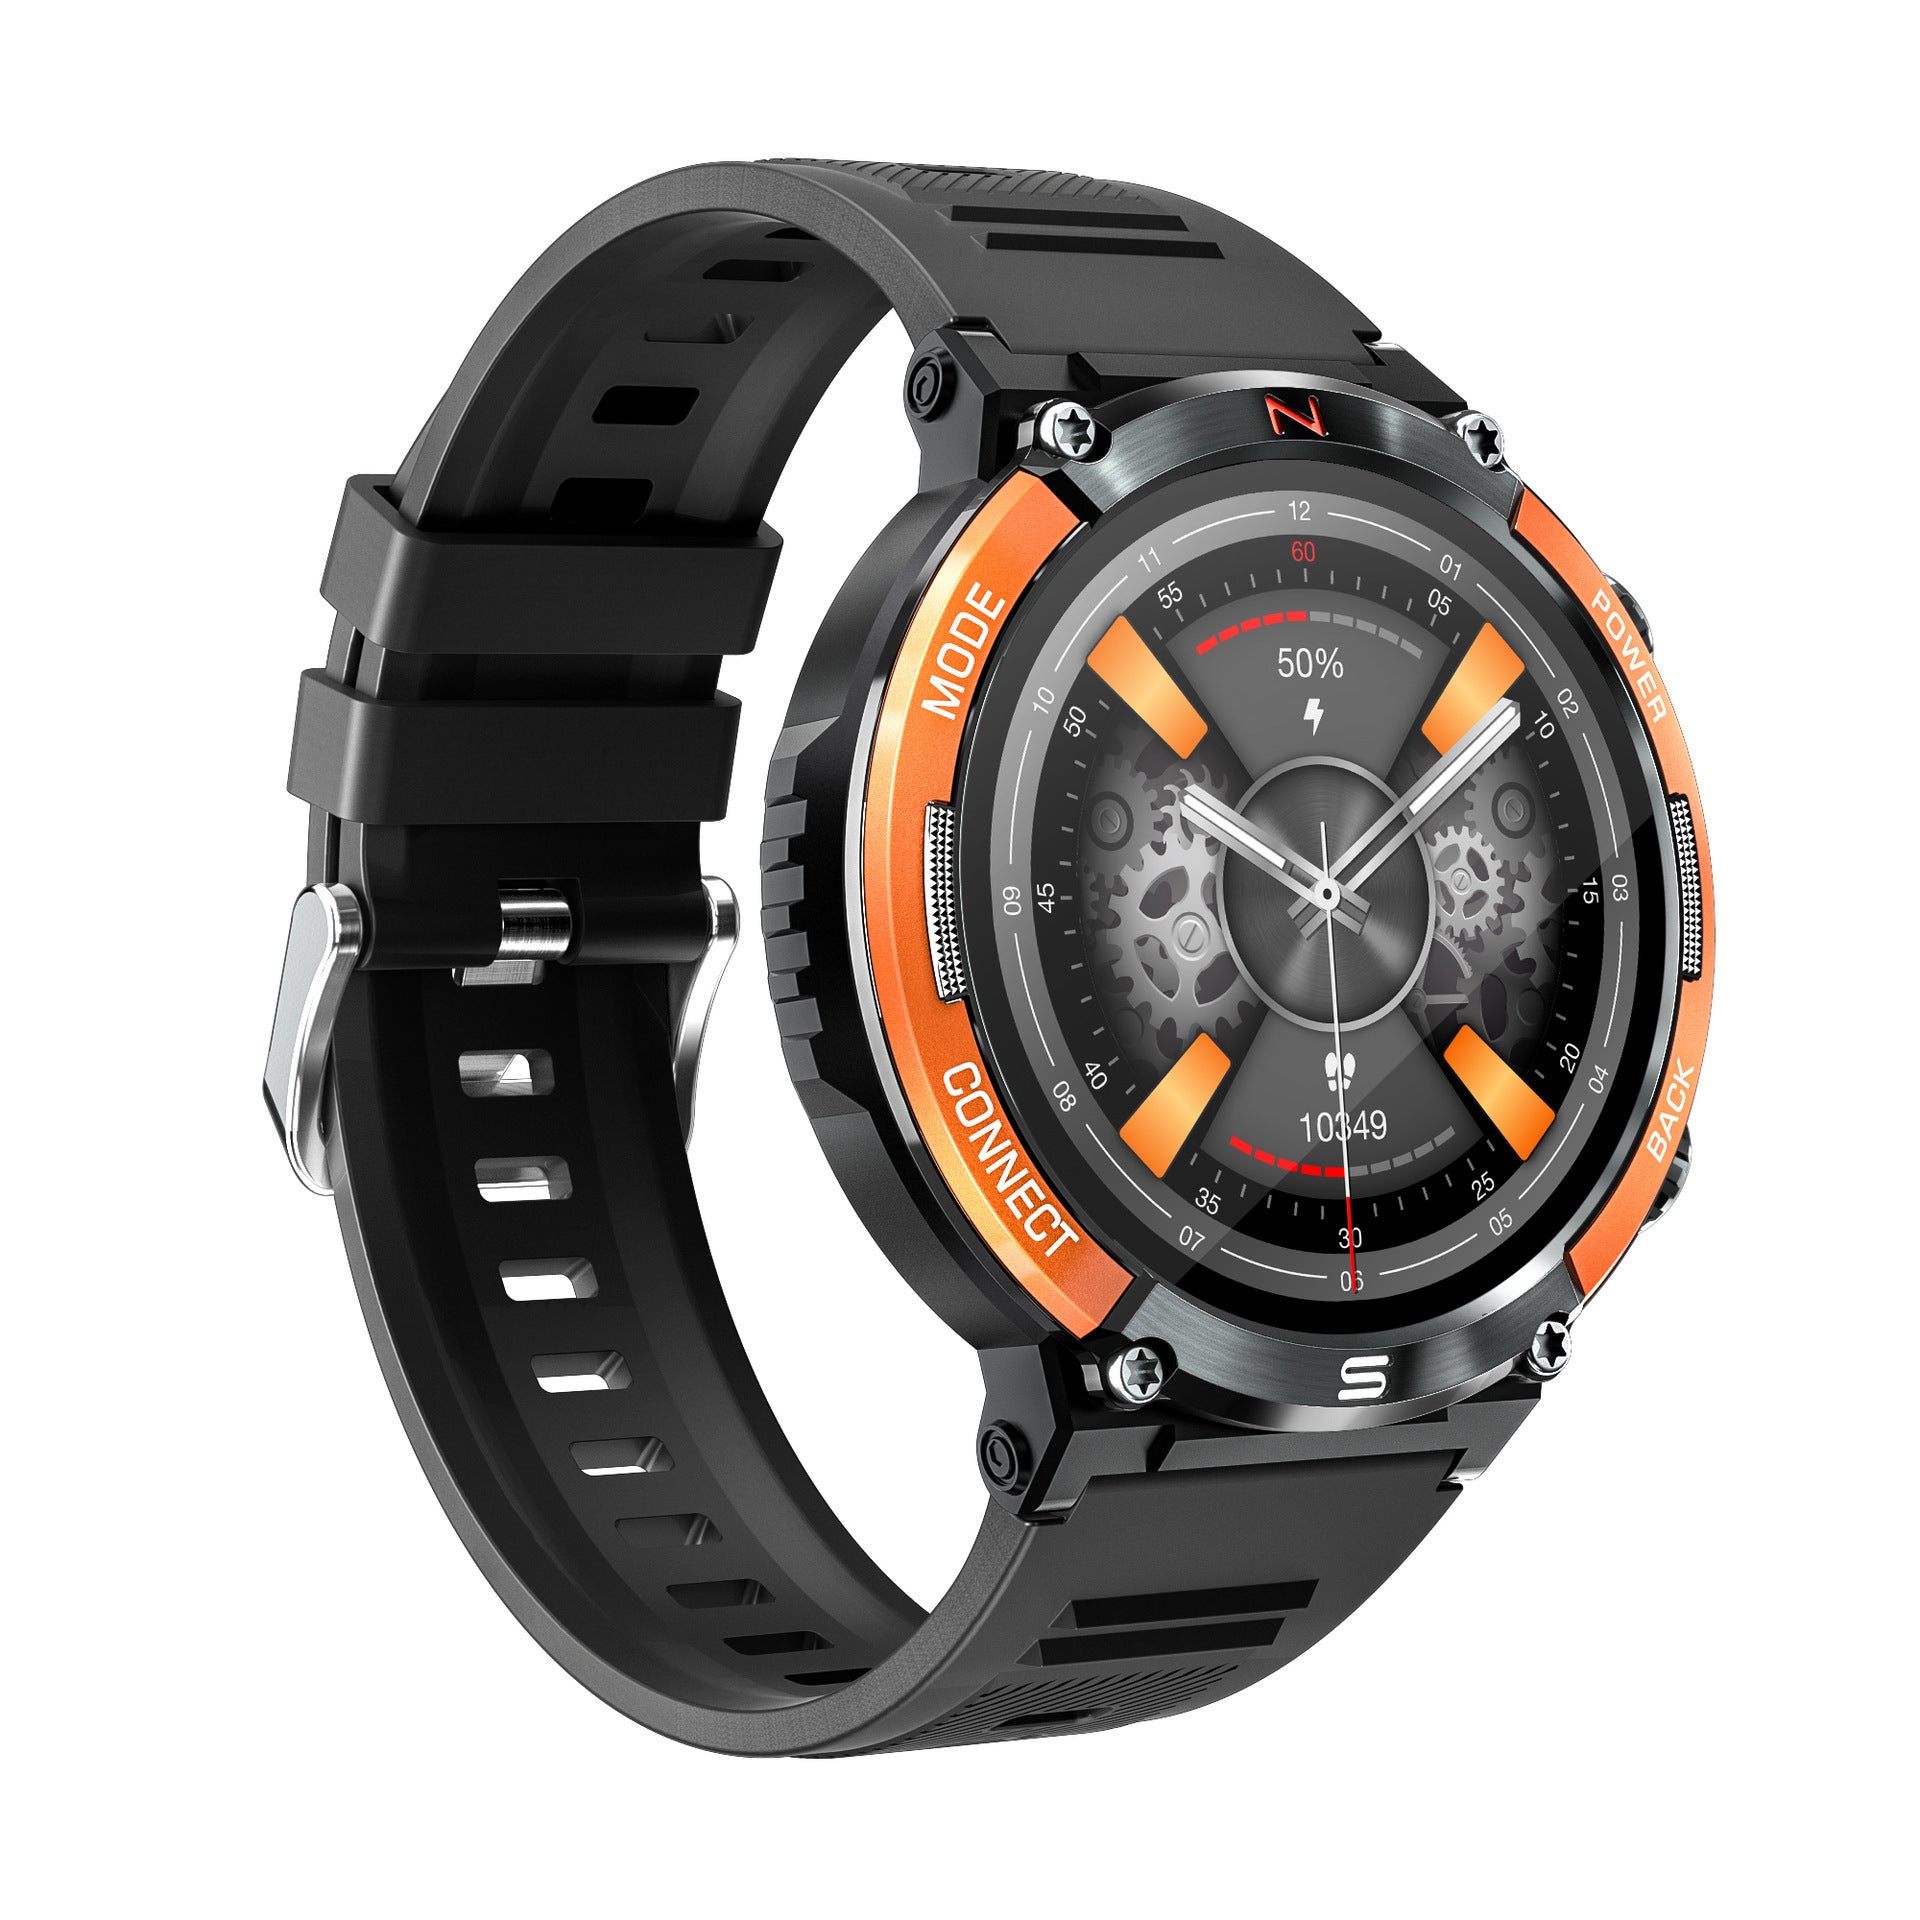 Men's Fashion Watch with Large Screen, Ultra Long Battery Life and Drop Protection